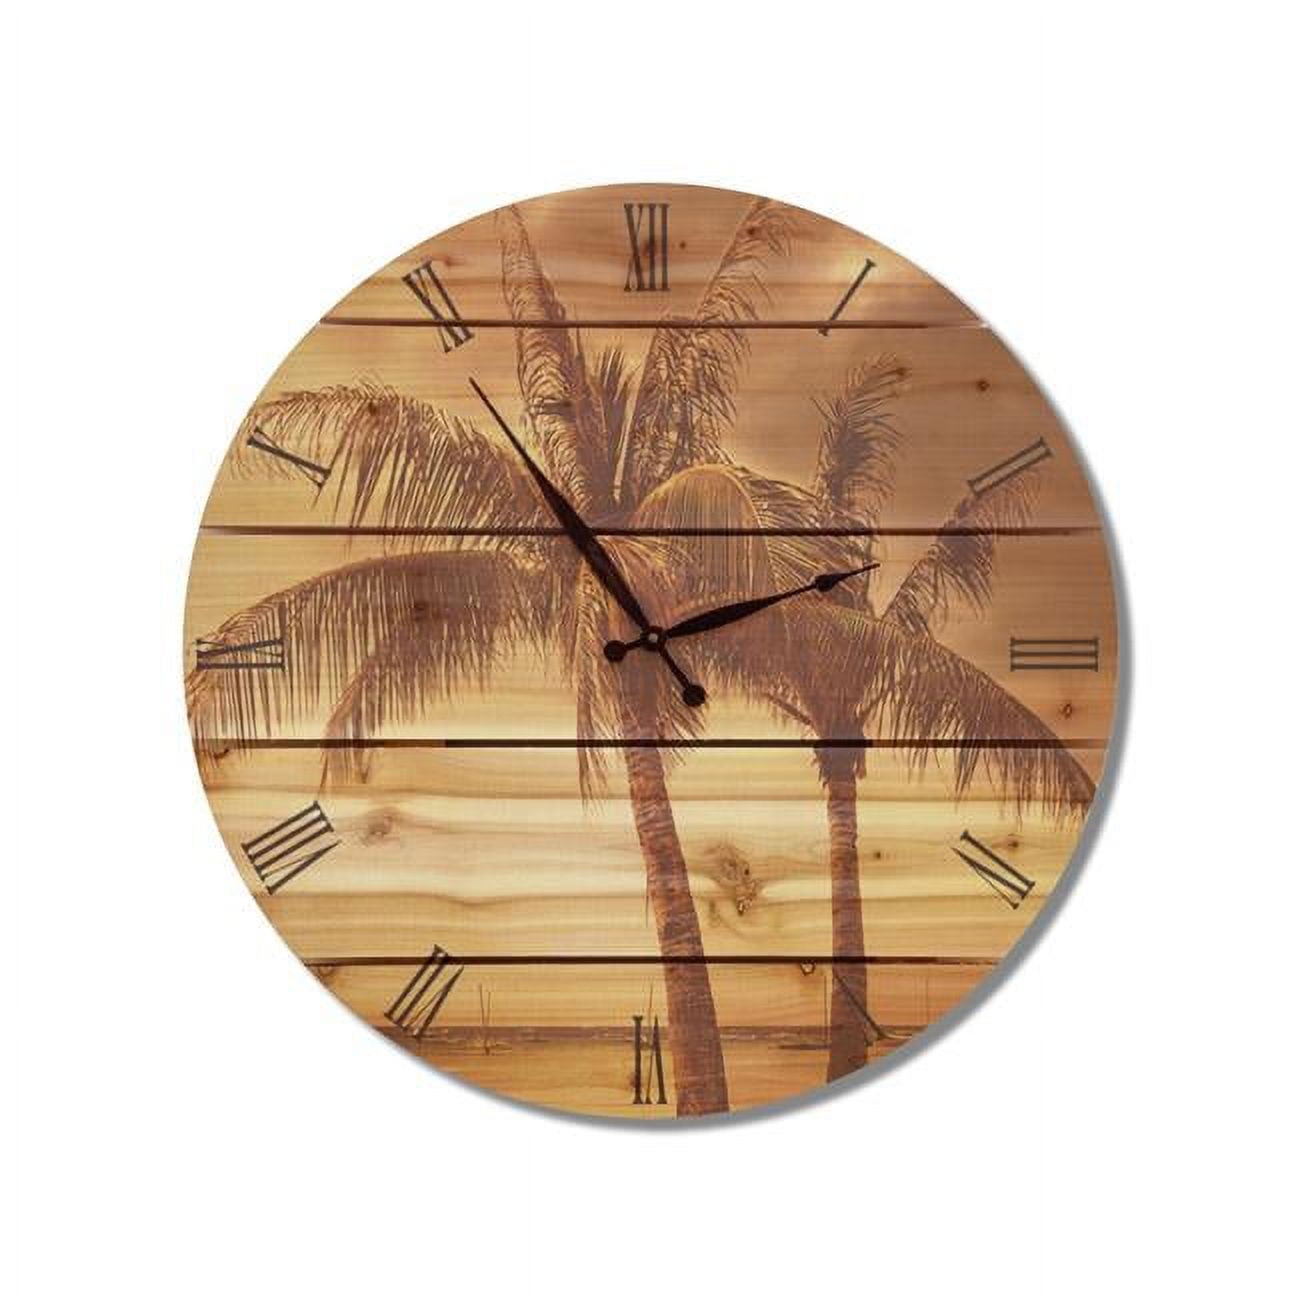 Picture of Day Dream VTC24 24 in. Vintage Tropic wood Wall Clock